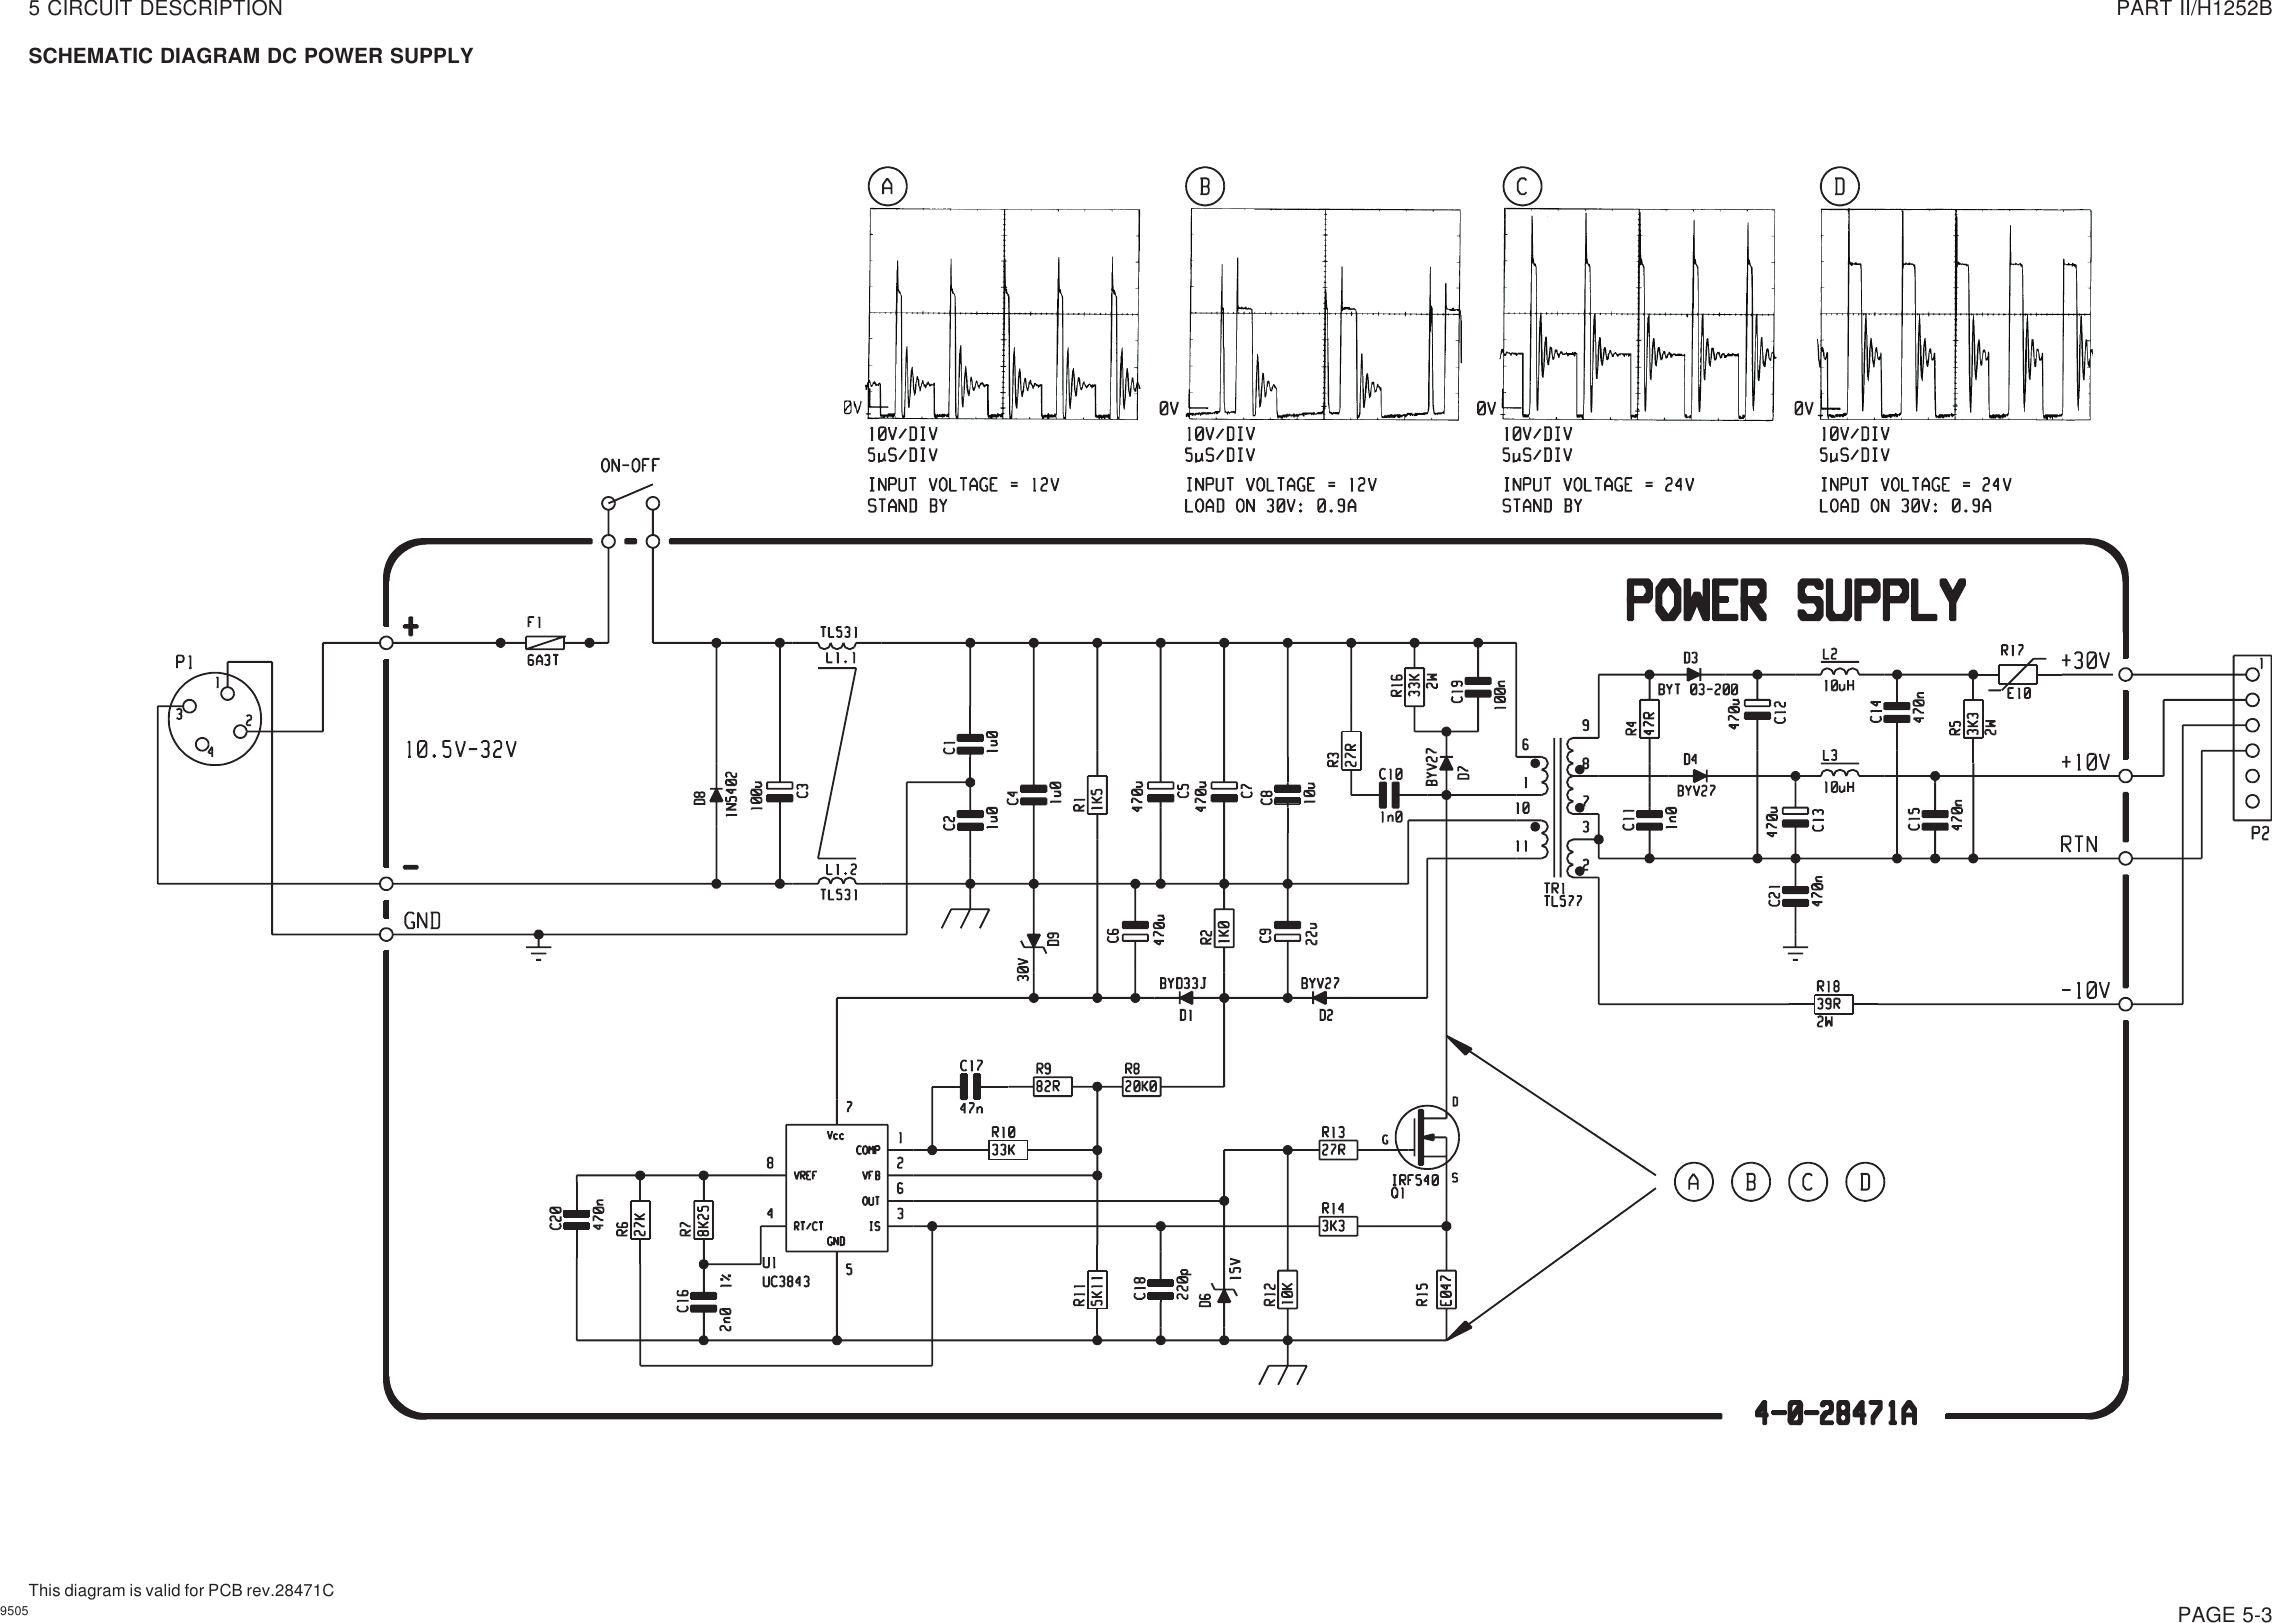 5 CIRCUIT DESCRIPTION PART II/H1252BSCHEMATIC DIAGRAM DC POWER SUPPLYPAGE 5-3This diagram is valid for PCB rev.28471C9505